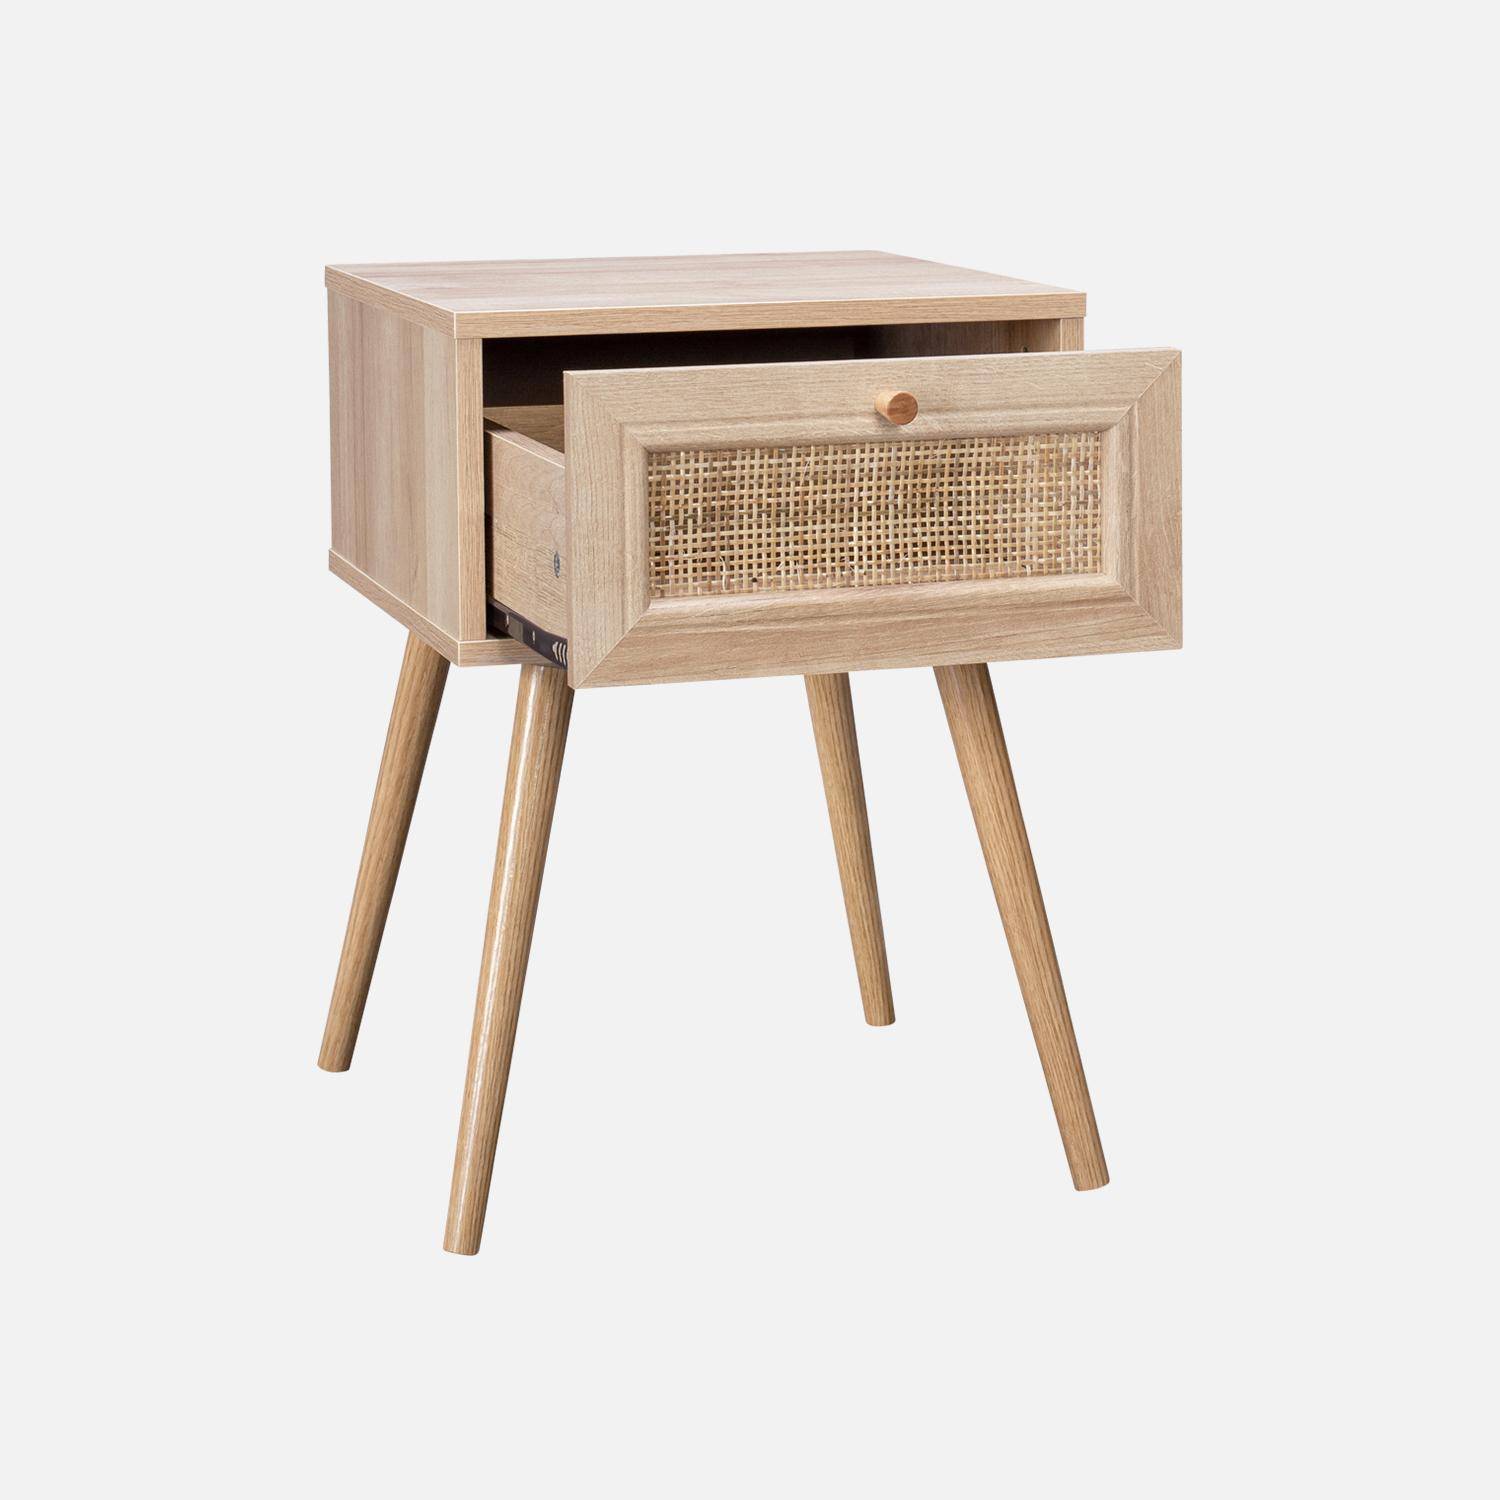 Pair of woven rattan bedside tables with drawer, 39x39x55.4cm - Boheme - Natural Wood colour,sweeek,Photo6